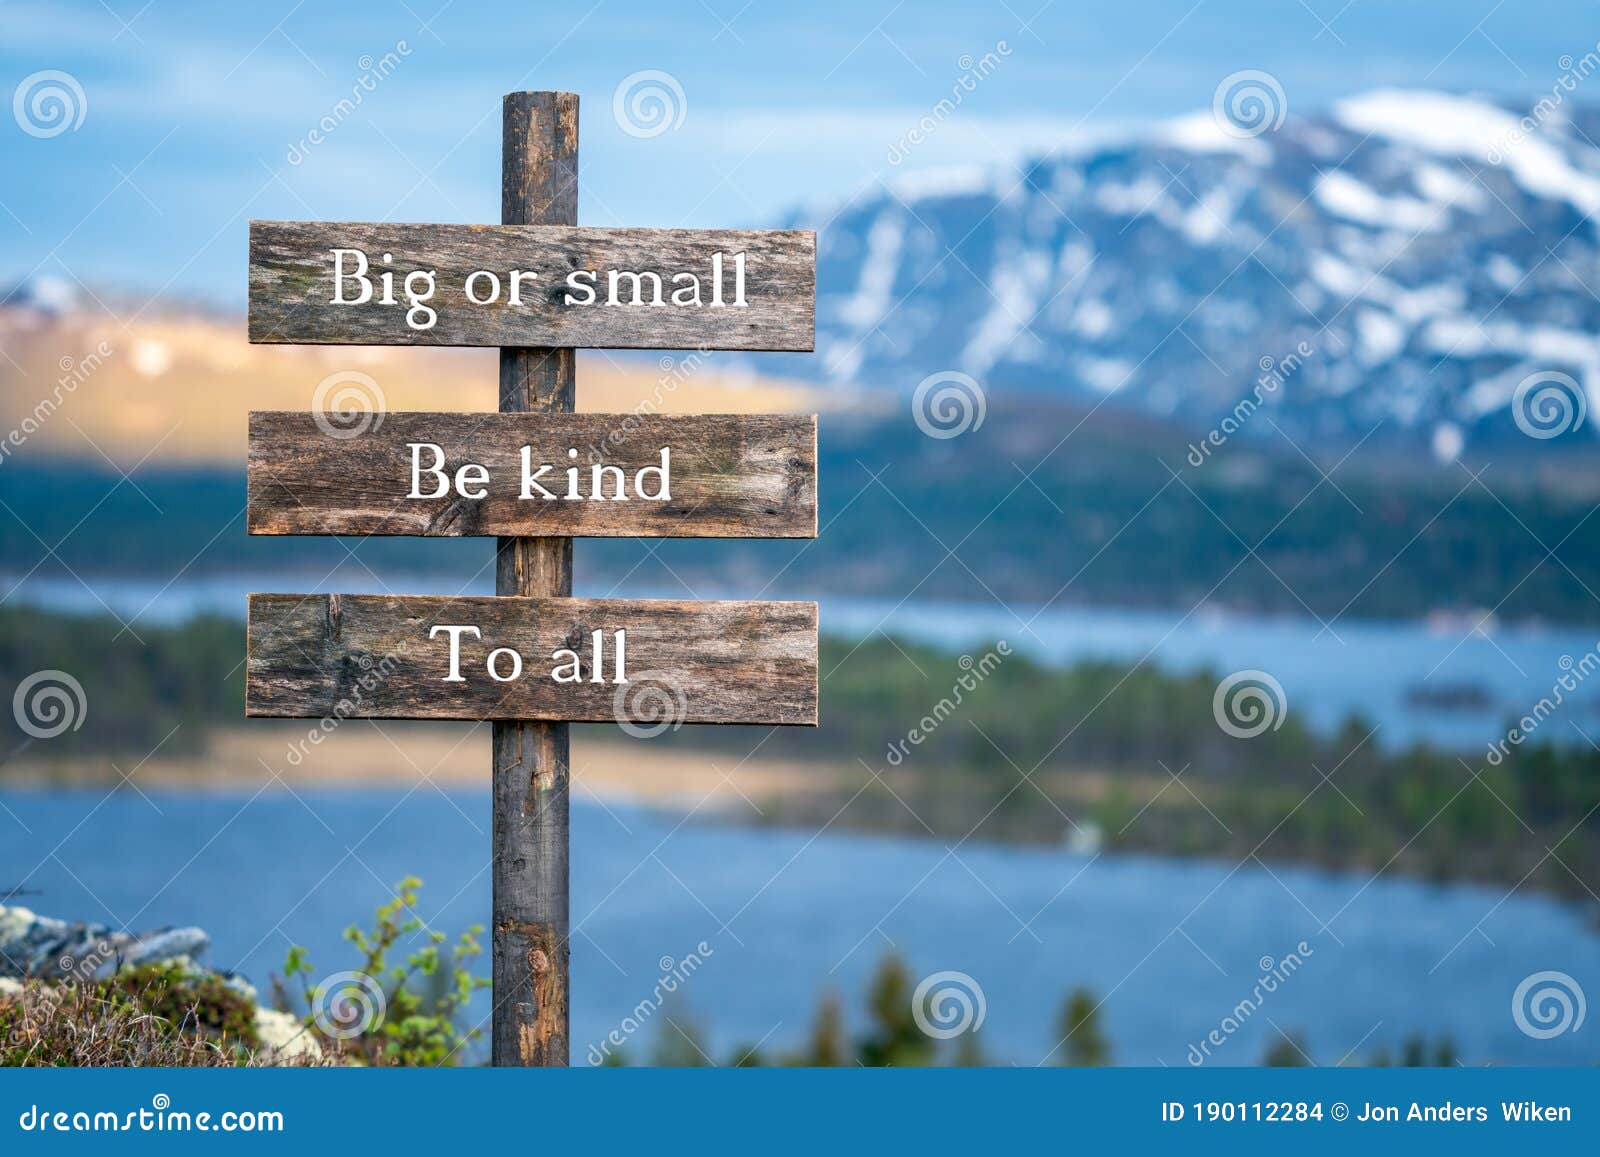 big or small be kind to alle text on wooden signpost